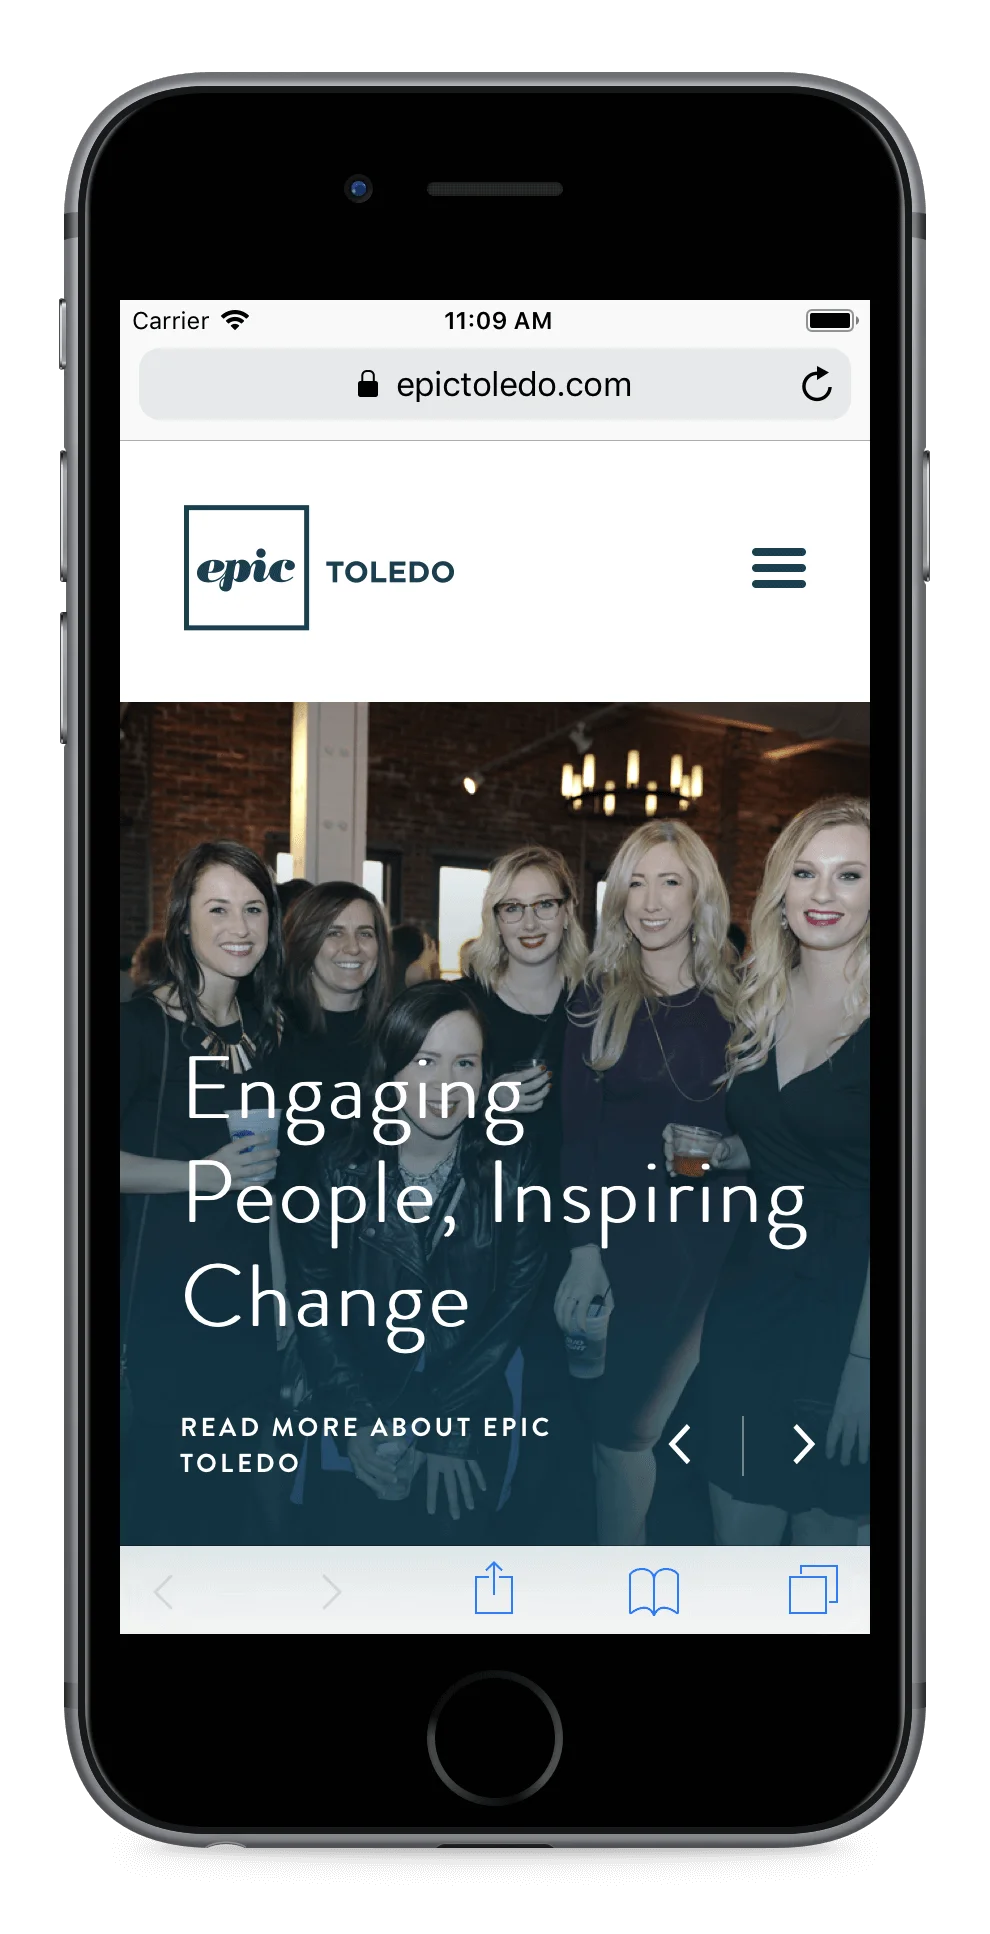 An apple iPhone showcasing the new epic toledo website